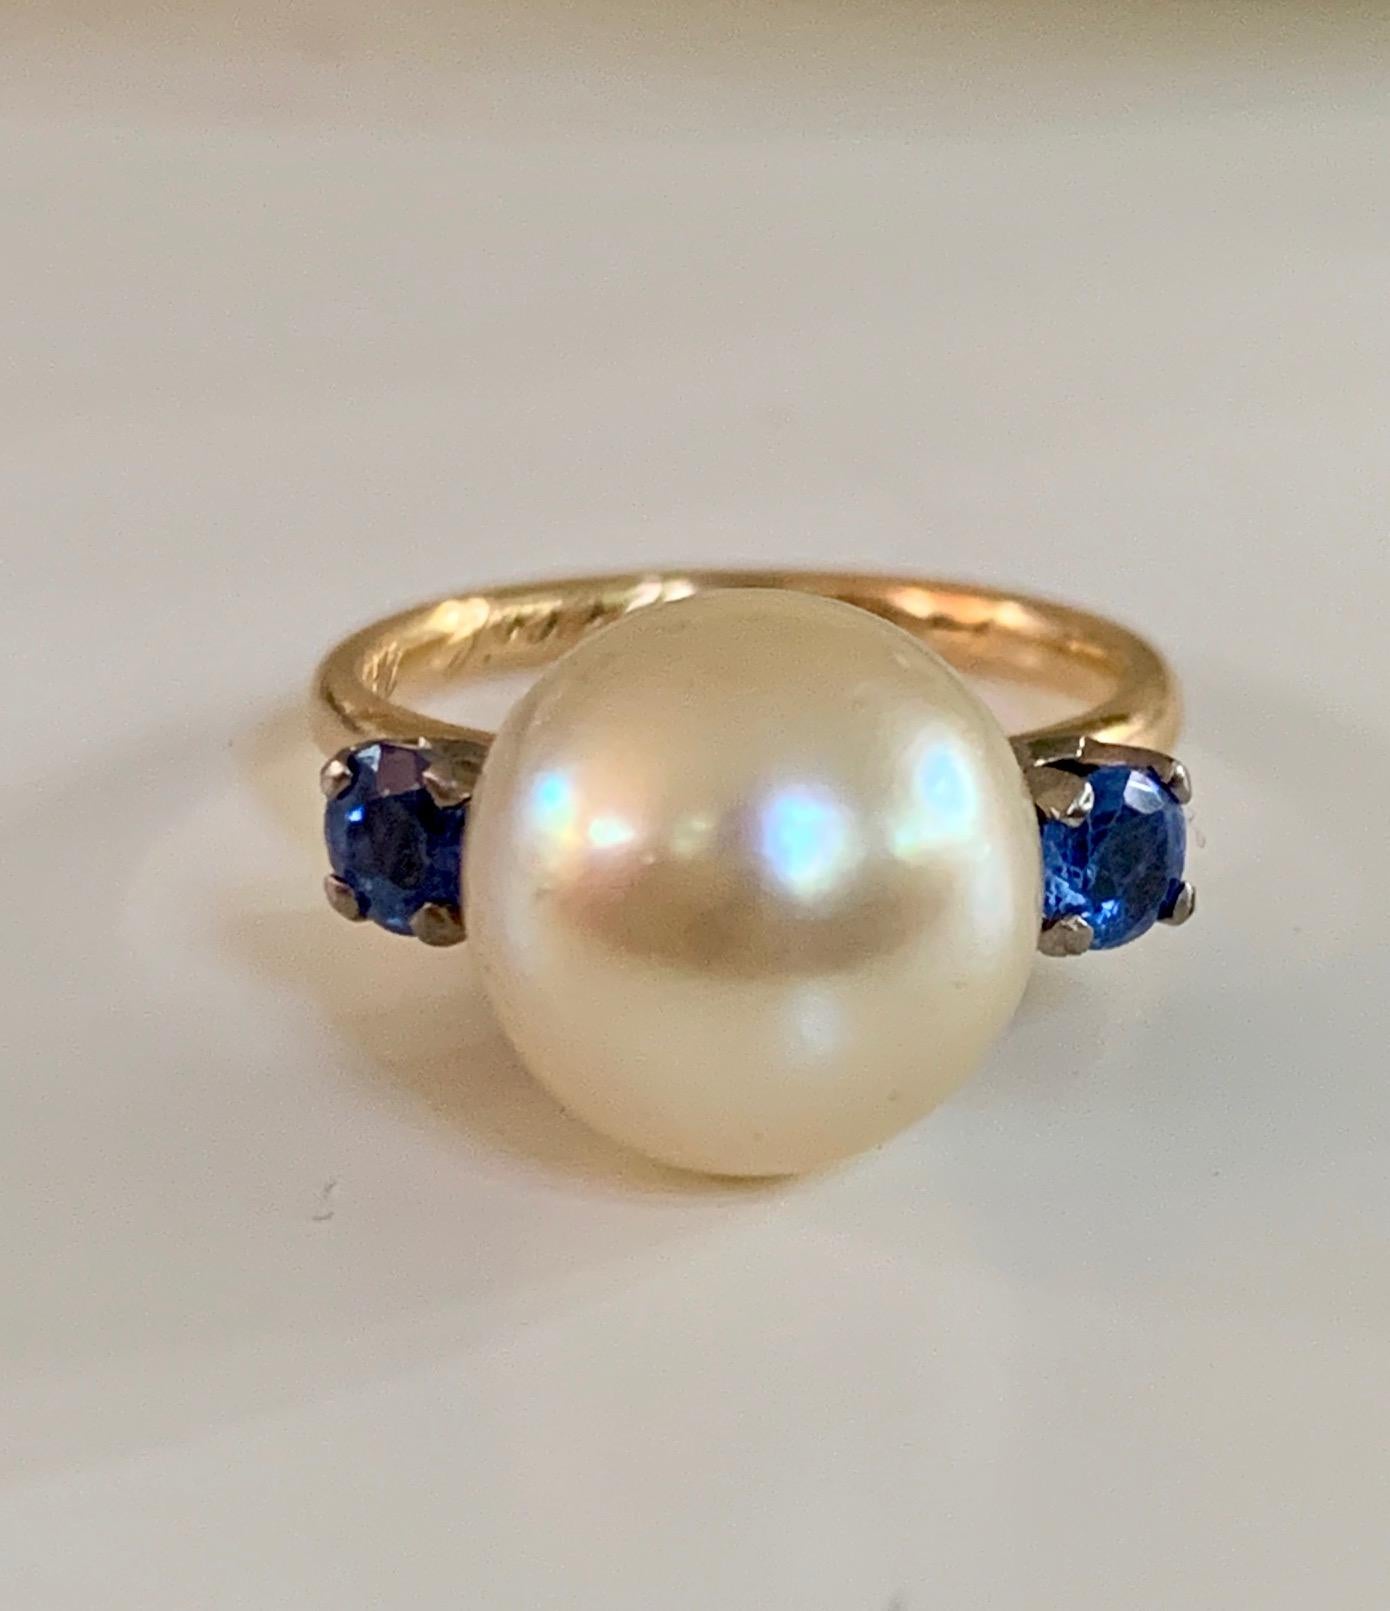 This 11mm Yellow South Sea Pearl 18 karat yellow Gold ring is breathtaking.  The Pearl is beautiful and will definitely turn an eye or two. IT It is accented on both side by a 3.5mm round, faceted, cornflower blue Sapphire.  

Size 5 1/4
Weight: 4.5